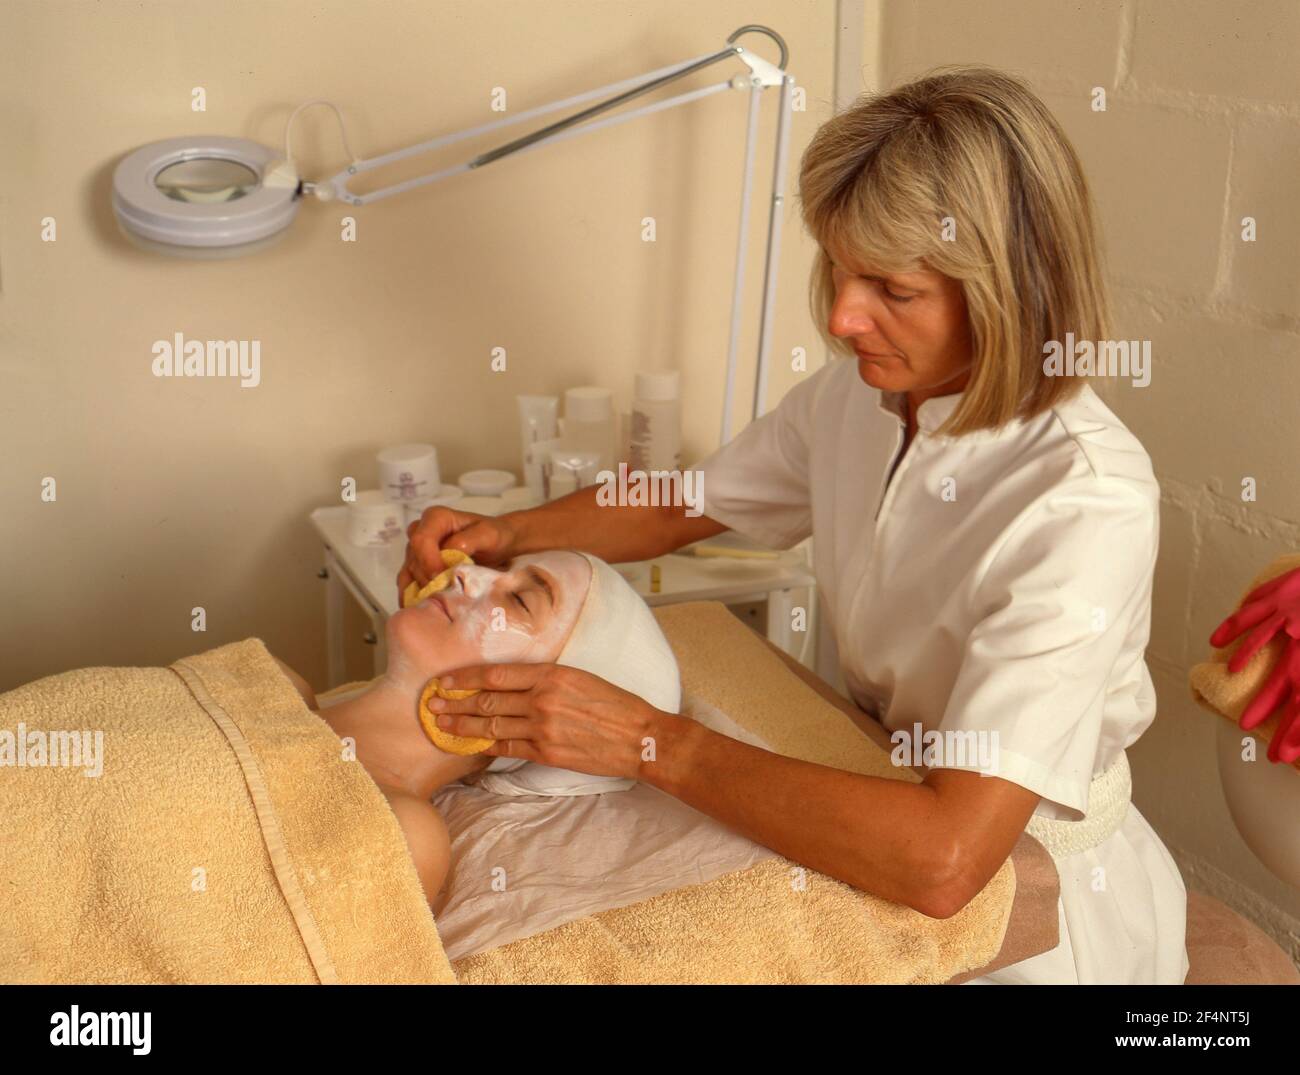 Beautican doing facial massage on young woman, Winkfield, Berkshire, England, United Kingdom Stock Photo